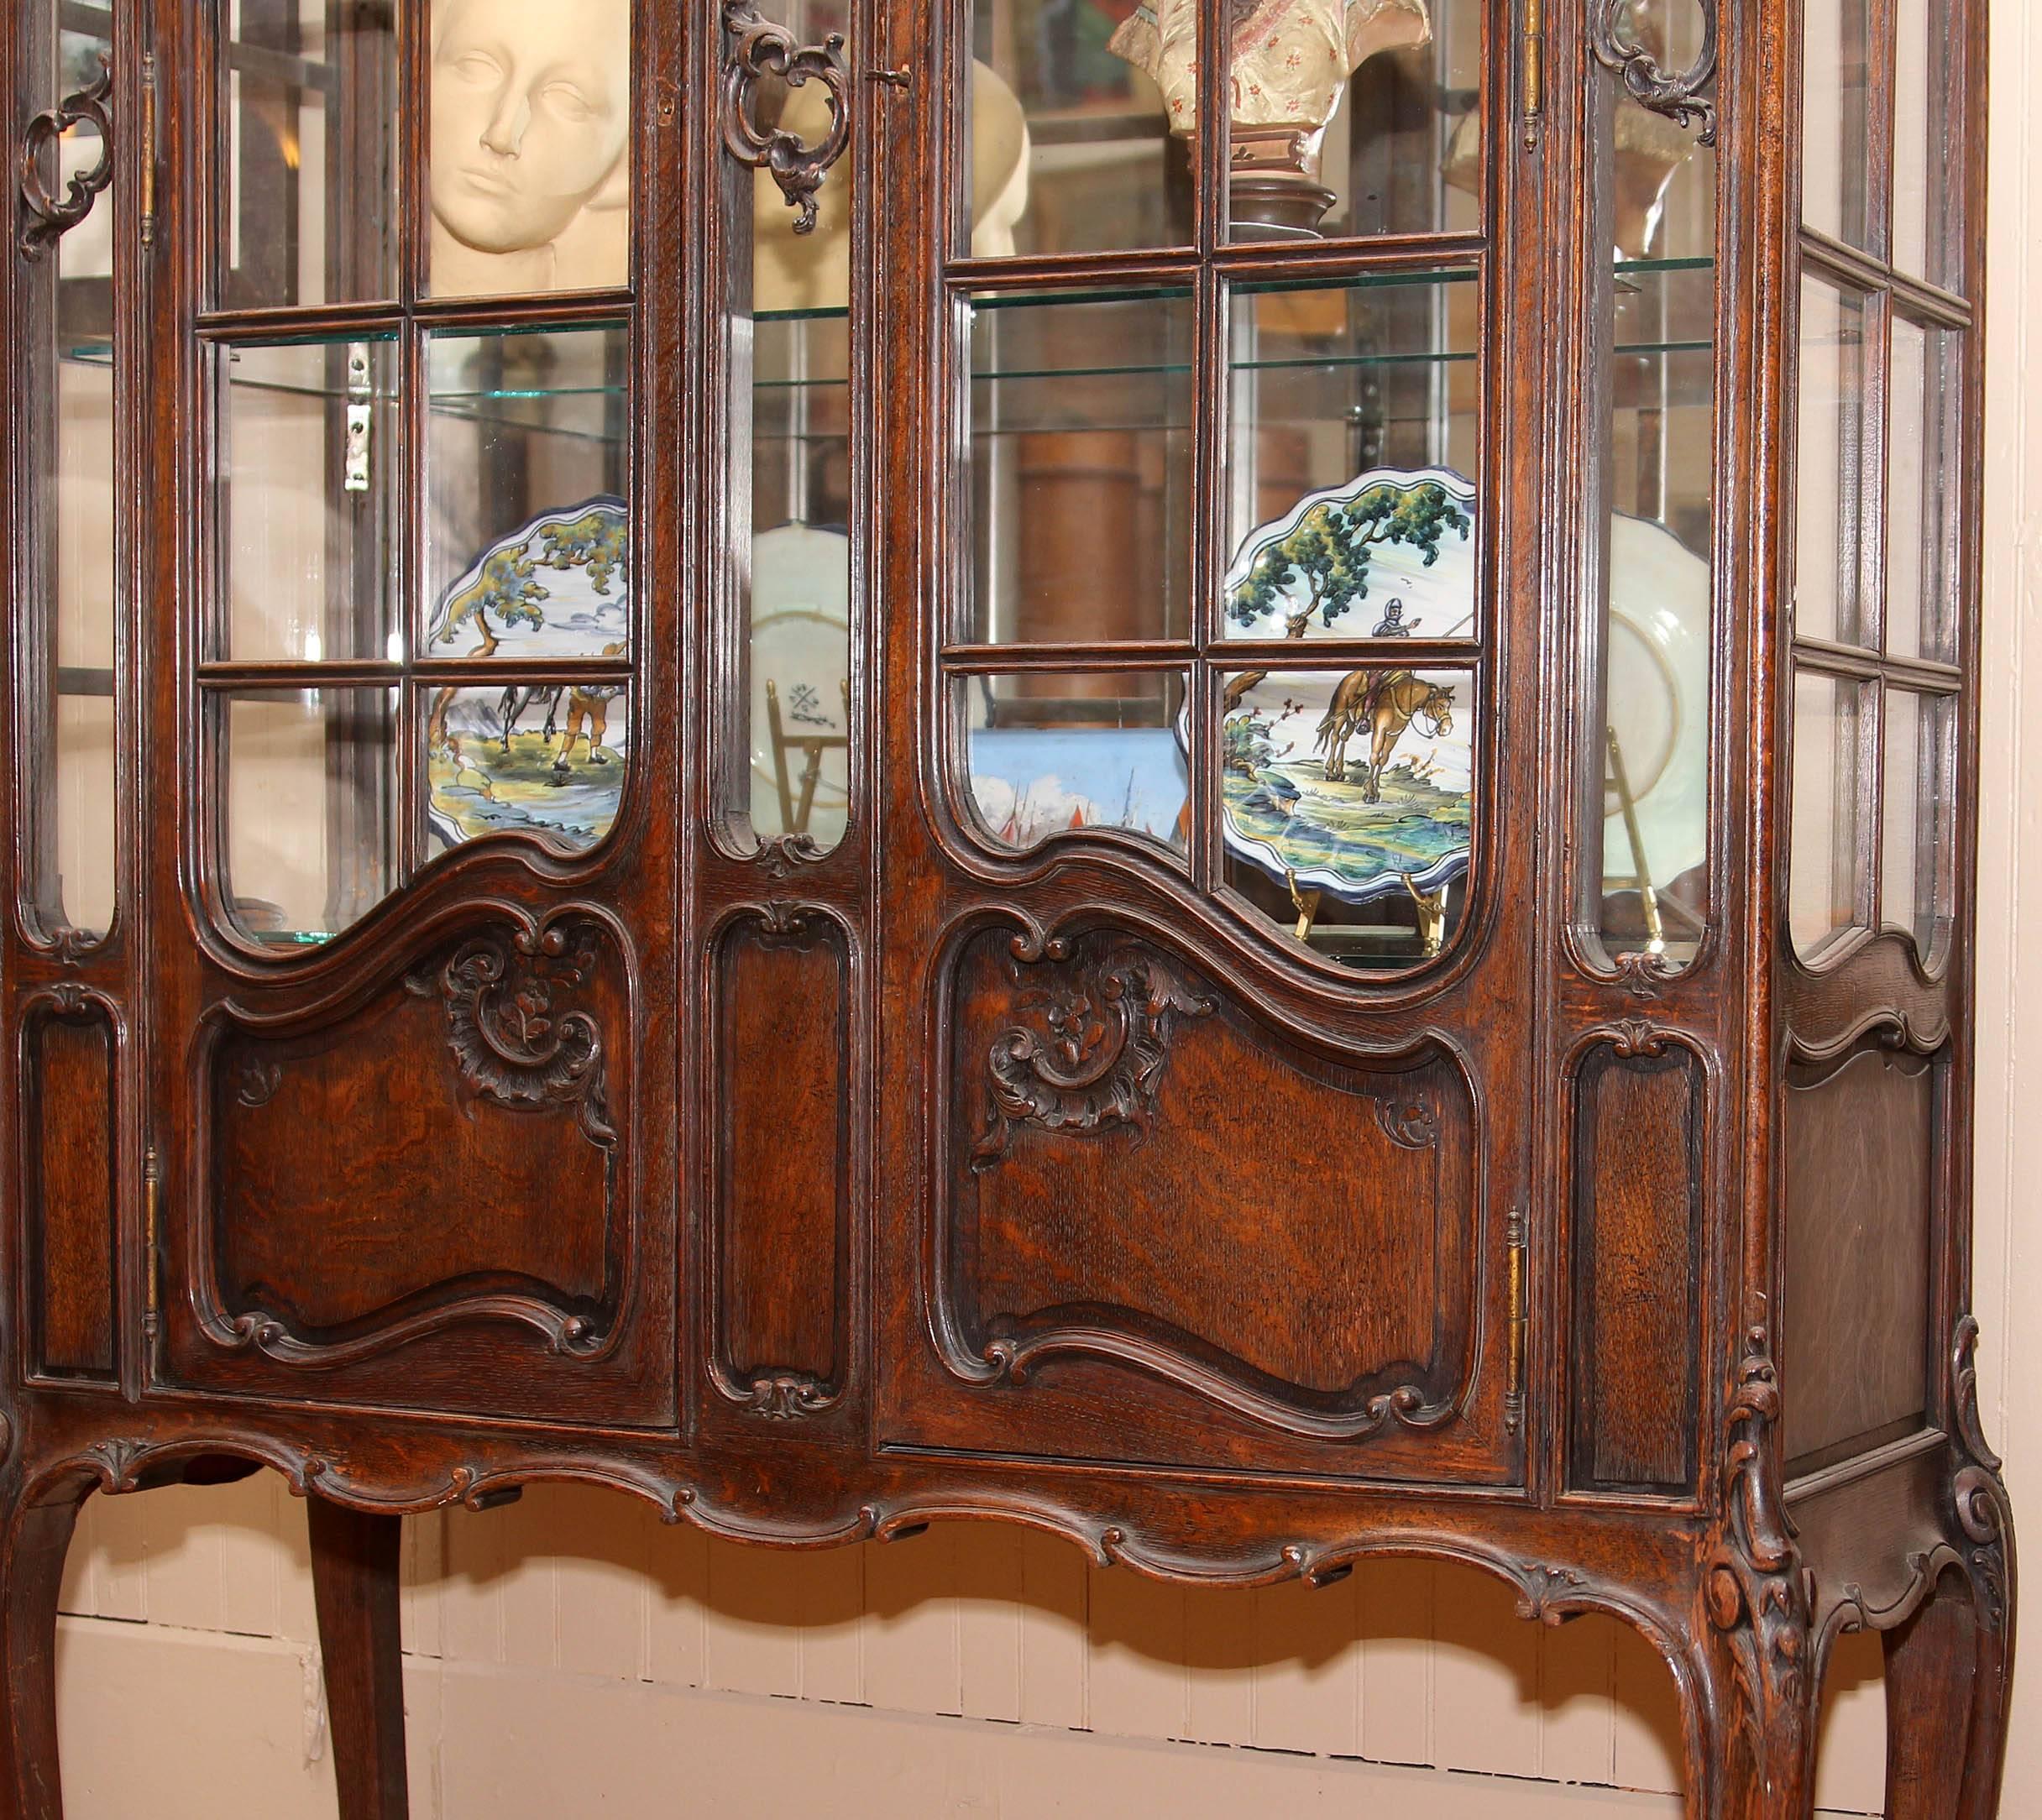 19th century French Louis XV style china cabinet. Carved solid quarter sawn oak. Interior fitted with light and plate glass shelving. Carved cabriole legs. An impressive 8